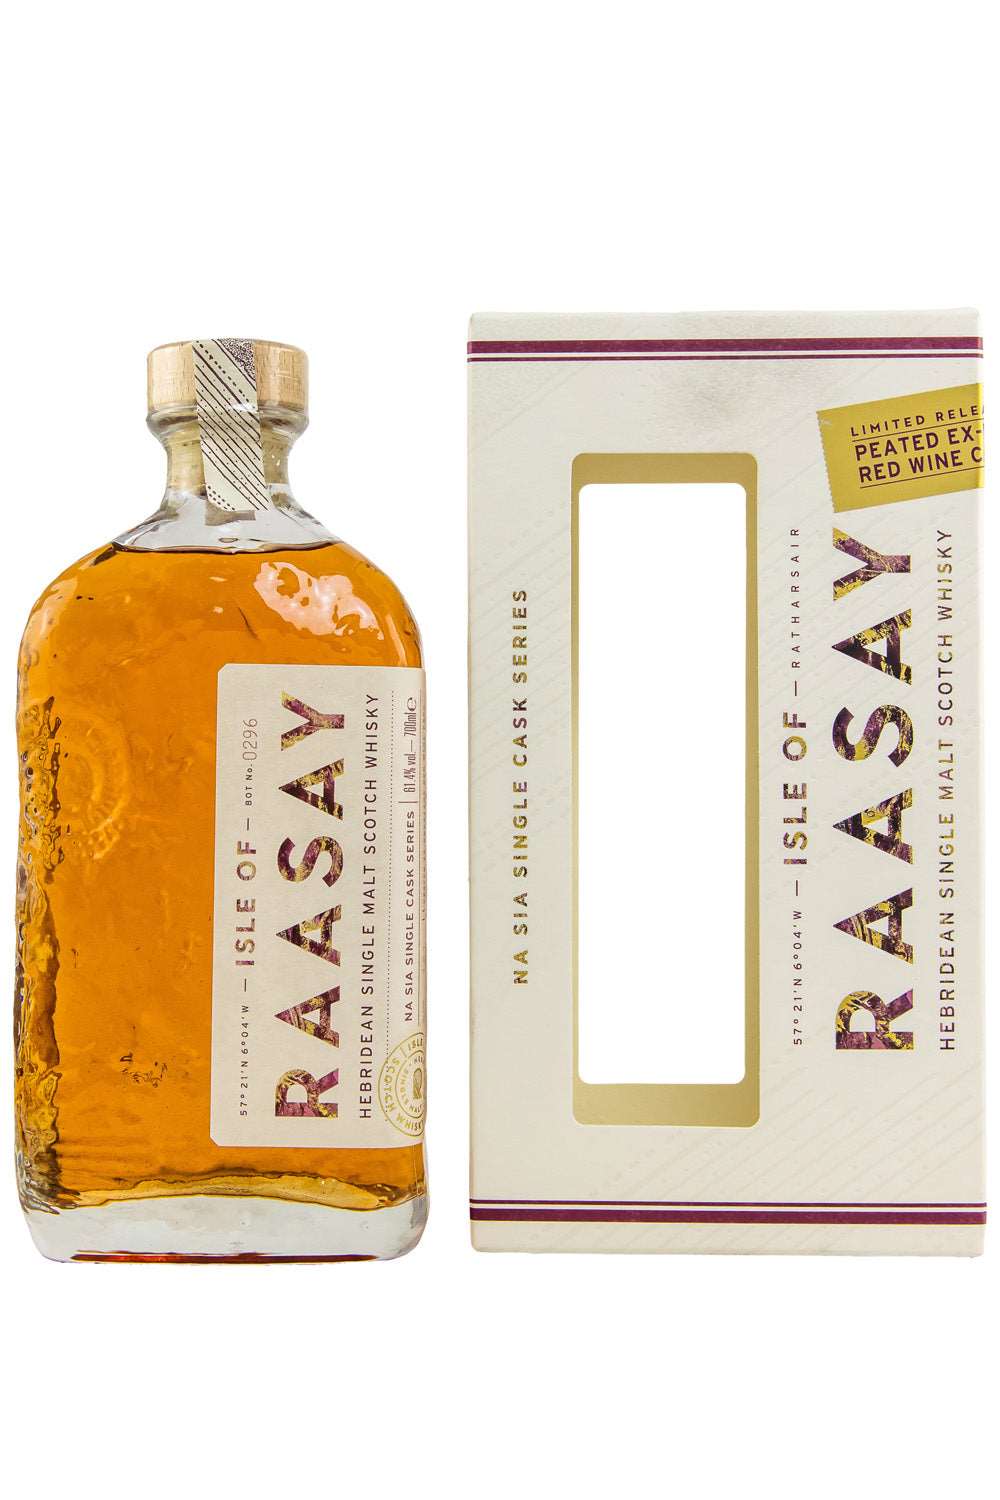 Isle of Raasay #18/665 Peated First Fill Bordeaux Cask Na Sia Single Cask Series 61,4% 700ml - Maltimore